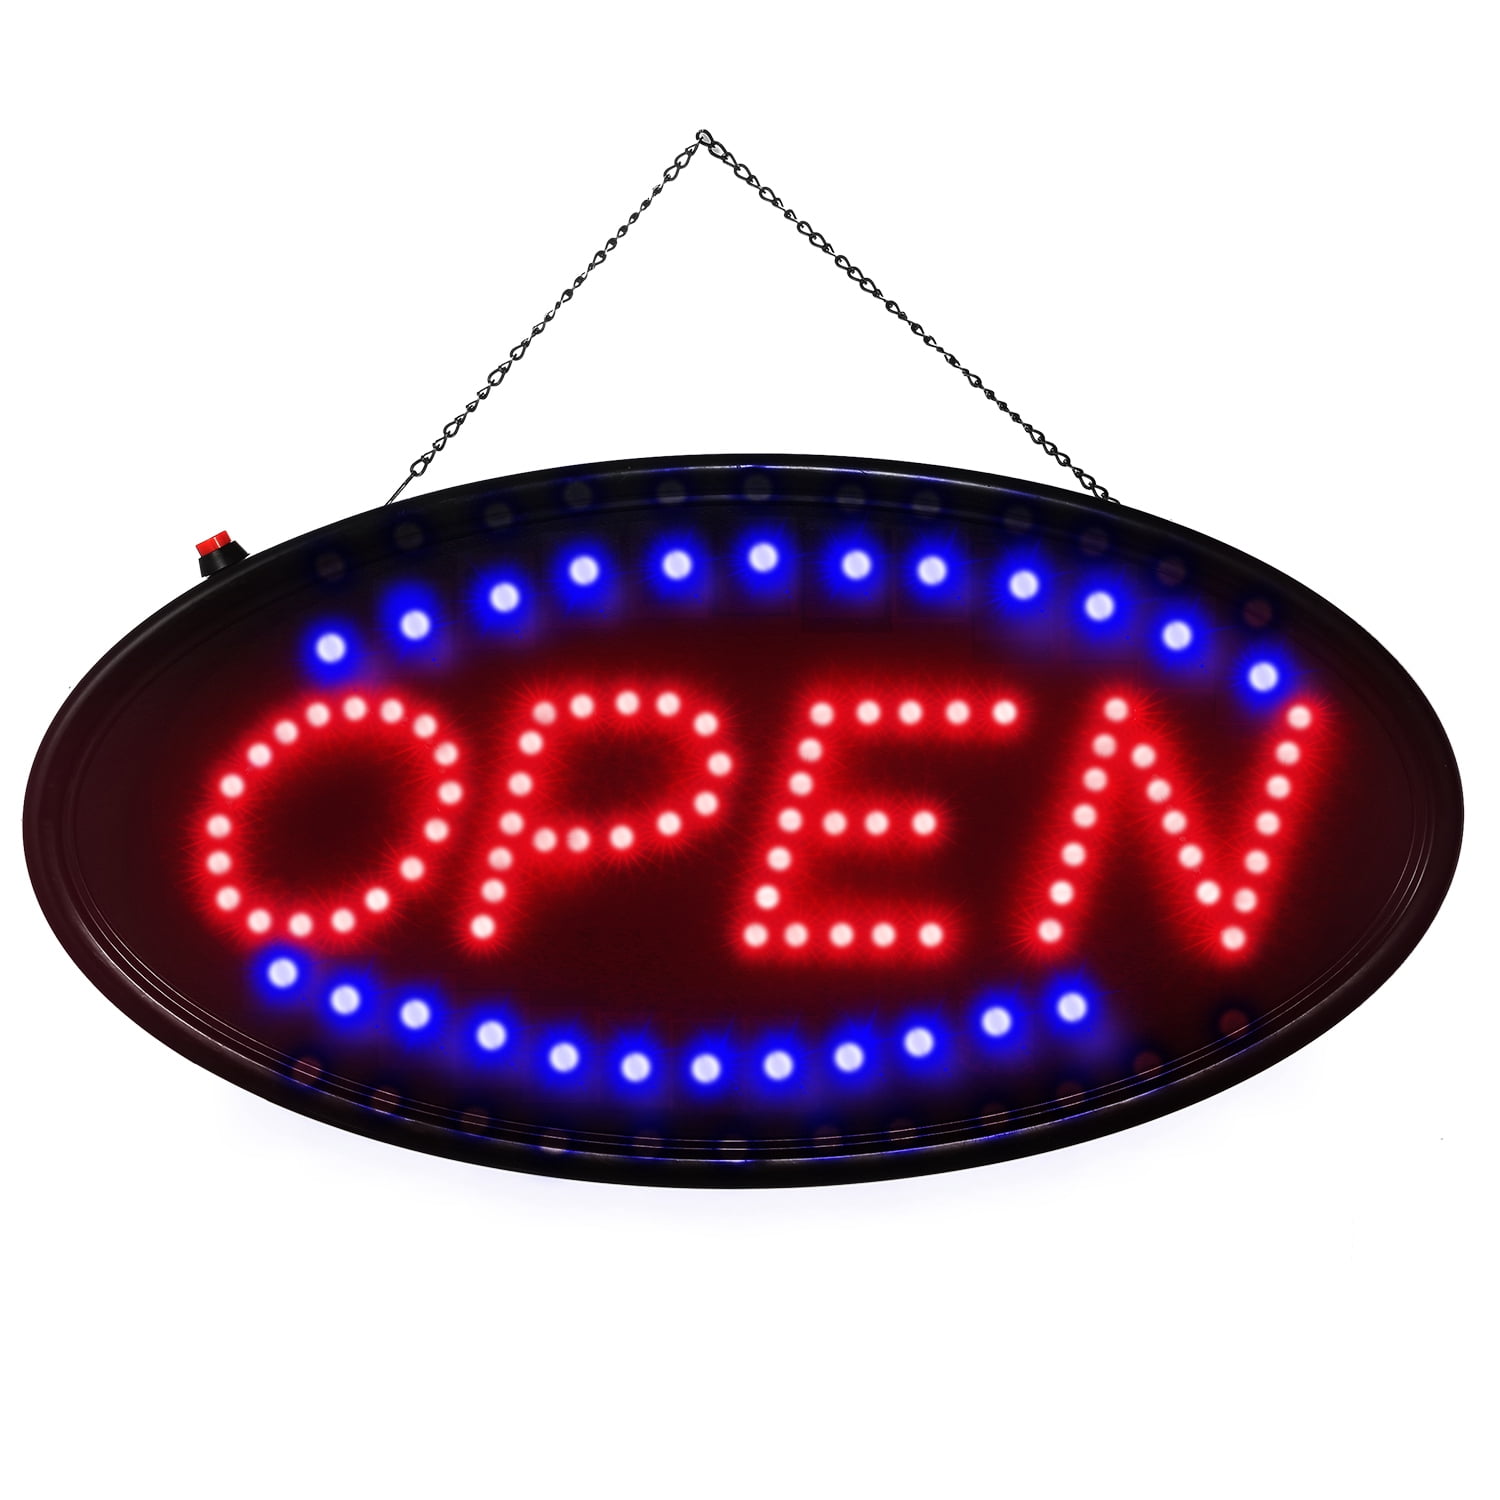 19"×10" Neon Animated LED Business Sign OPEN Light Bar Store Shop Display Board 